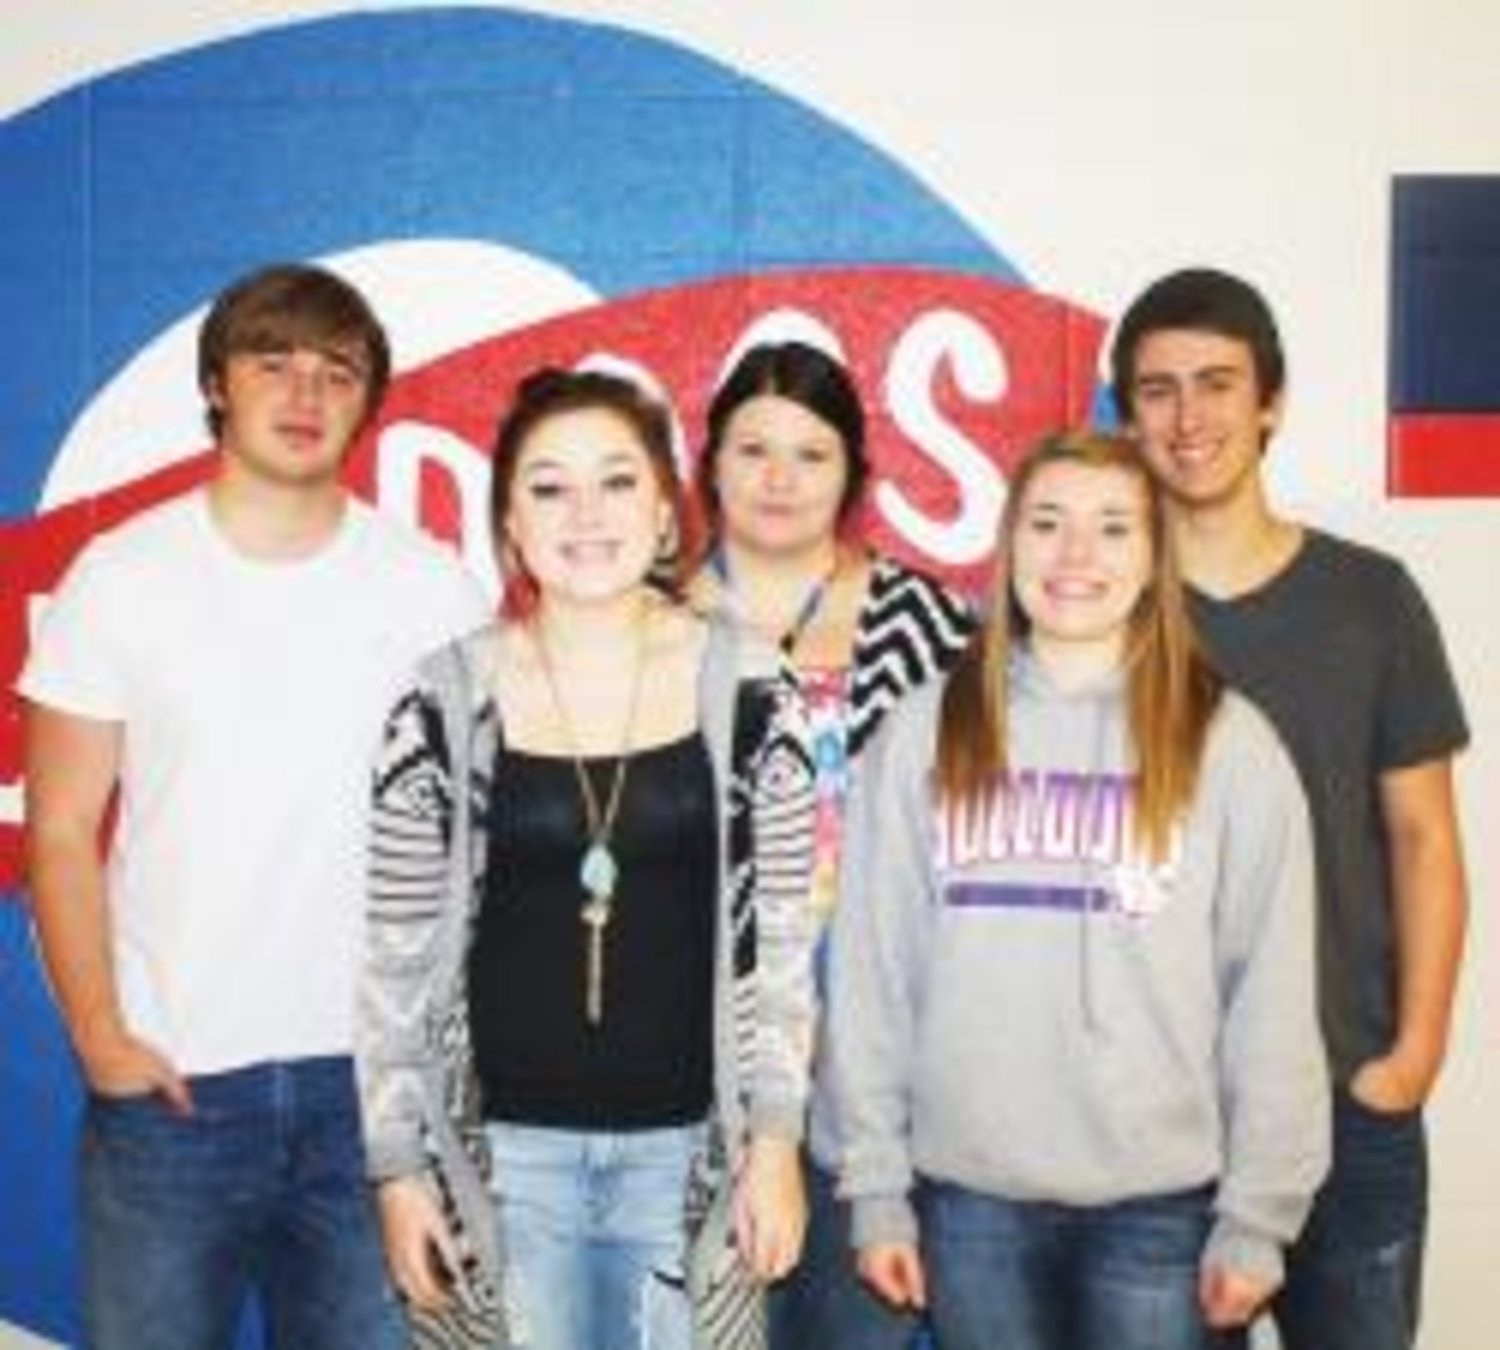 Quitman High School students won their way to state competition in "cupcake Wars." They are (left to right) Noah Morris, Jaycee Russell, Jamie Winkles, Sarah Leach and Taylor Patterson.